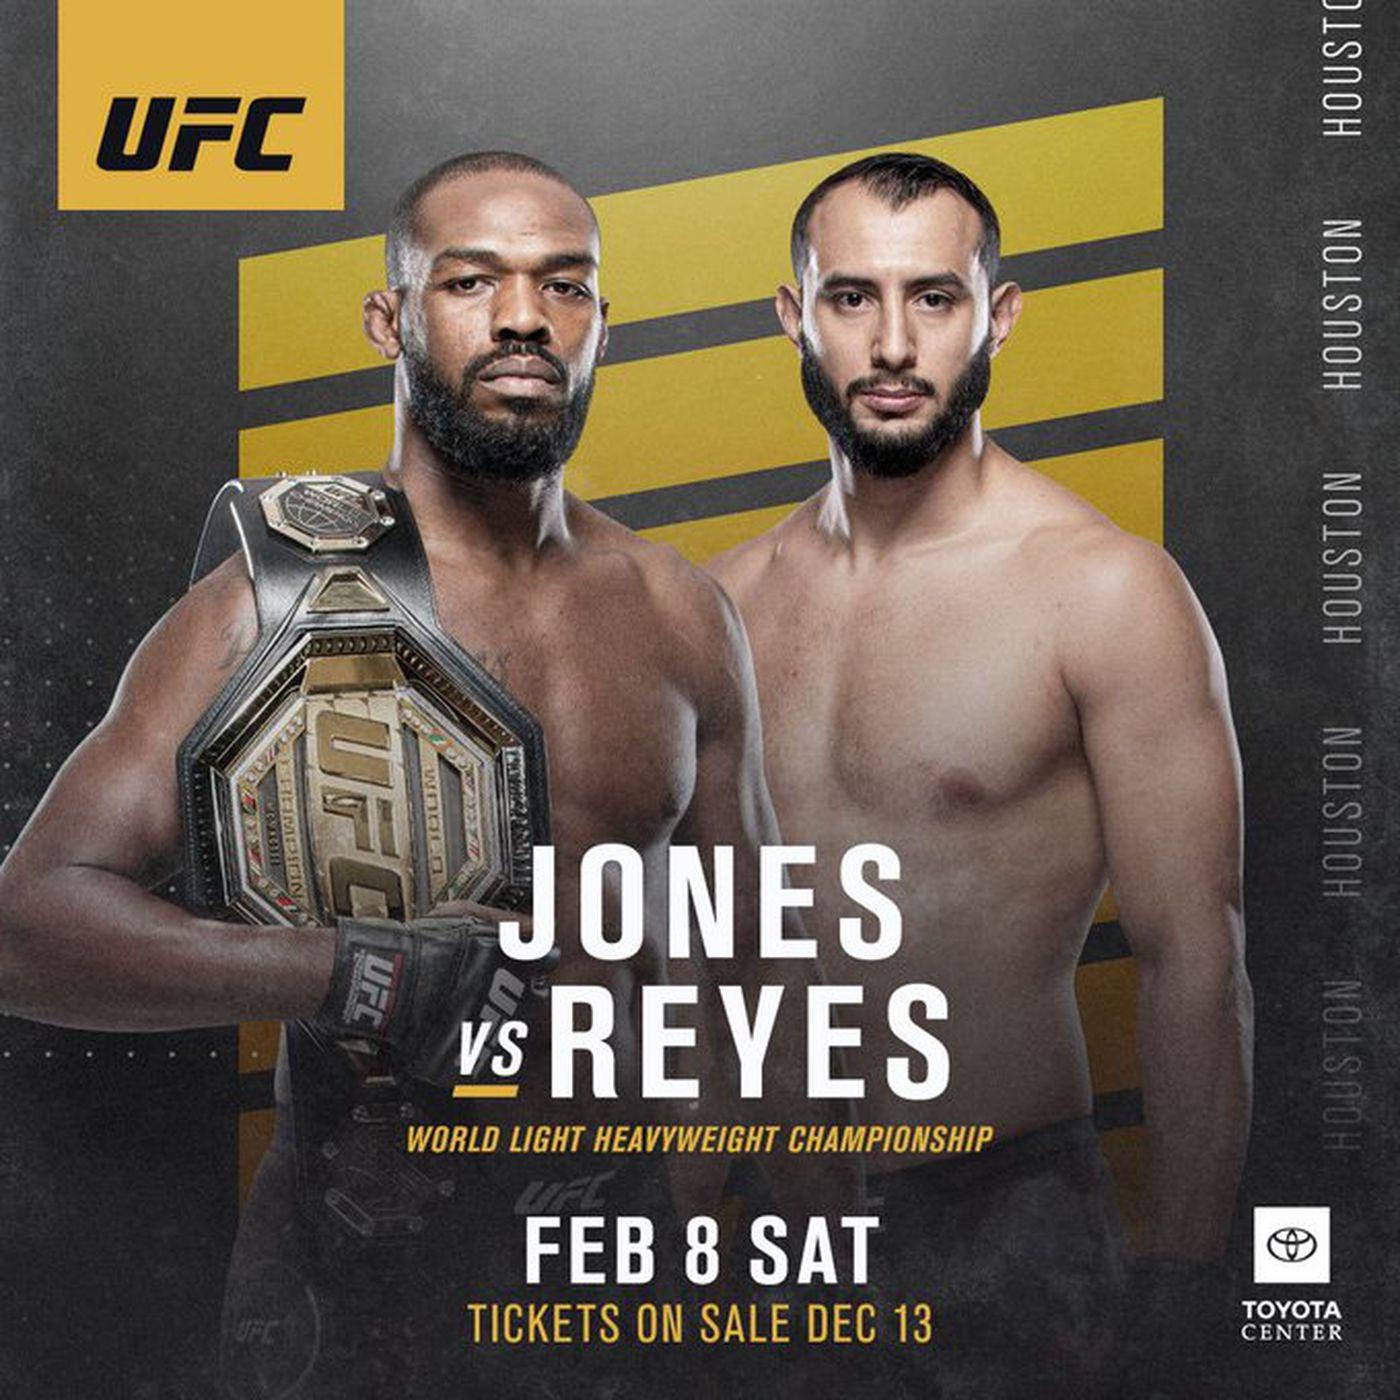 Latest UFC 247 fight card, rumors, and updates for 'Jones vs Reyes